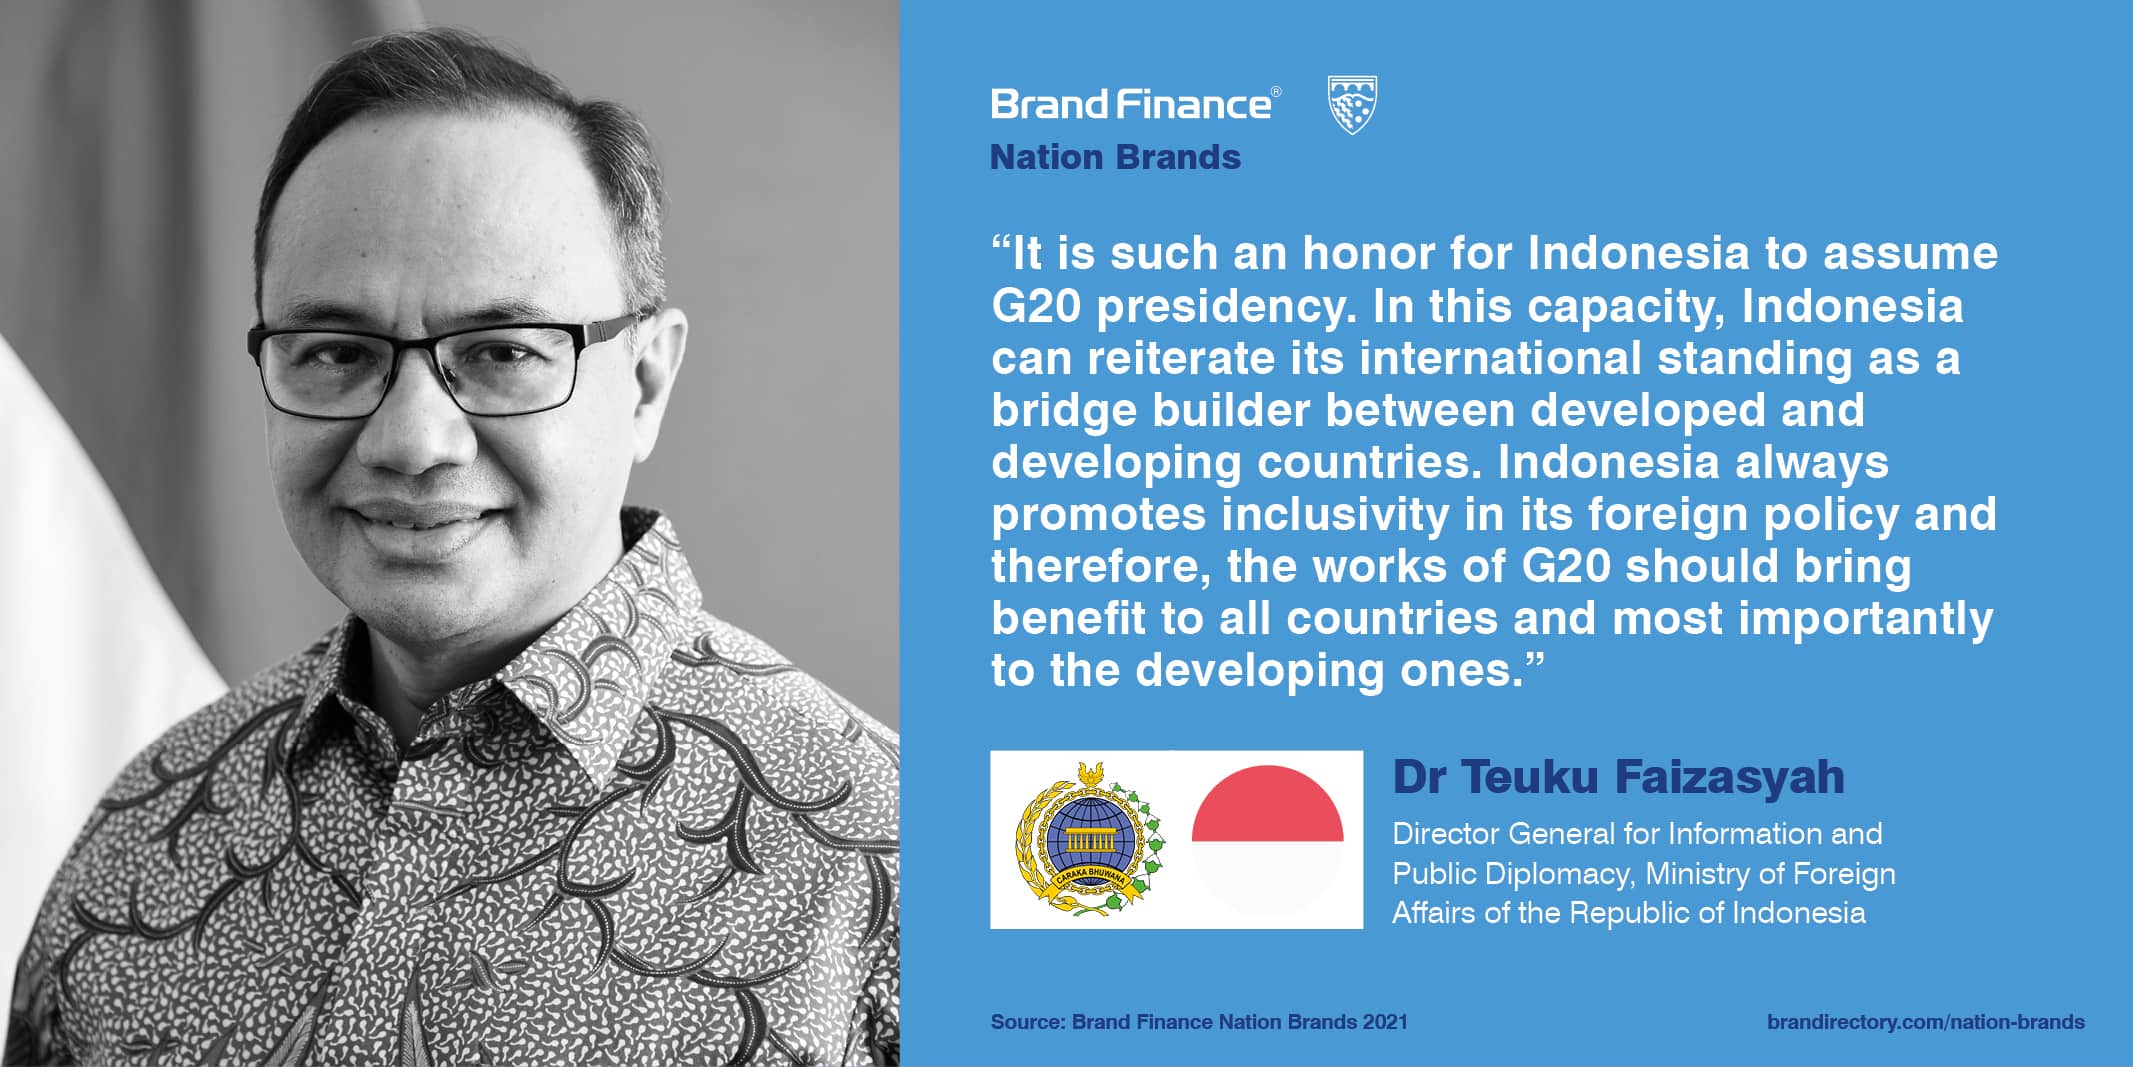  Dr Teuku Faizasyah, Ministry of Foreign Affairs of the Republic of Indonesia quote on how G20 can bring benefits to all countries